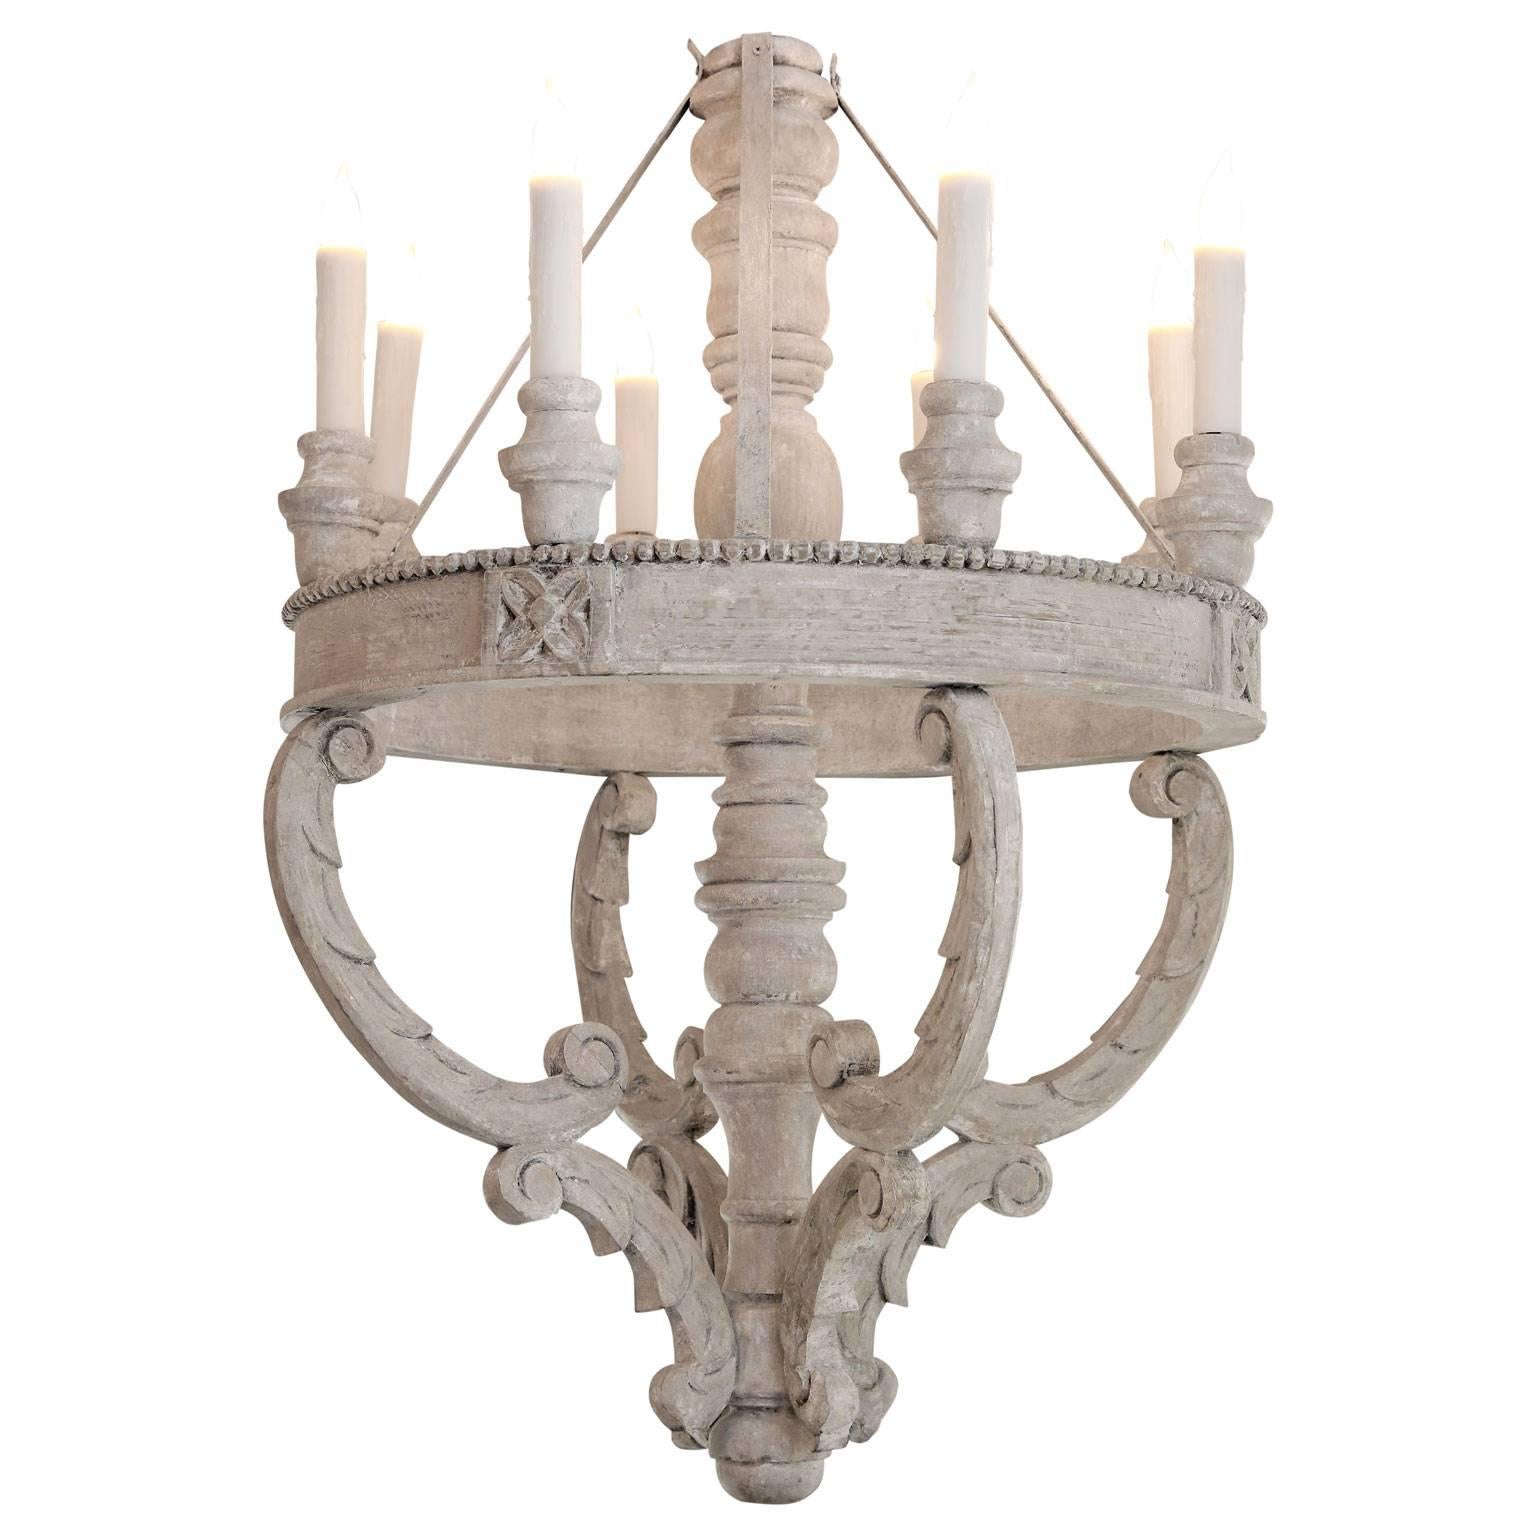 Large painted wooden chandeliers: eight-lights arranged around a 33 inch diameter ring with a carved beaded edge, supported by four sets of opposing C-scrolls and a central turned-body. Traces of gold leaf are visible from wear to the gray-white